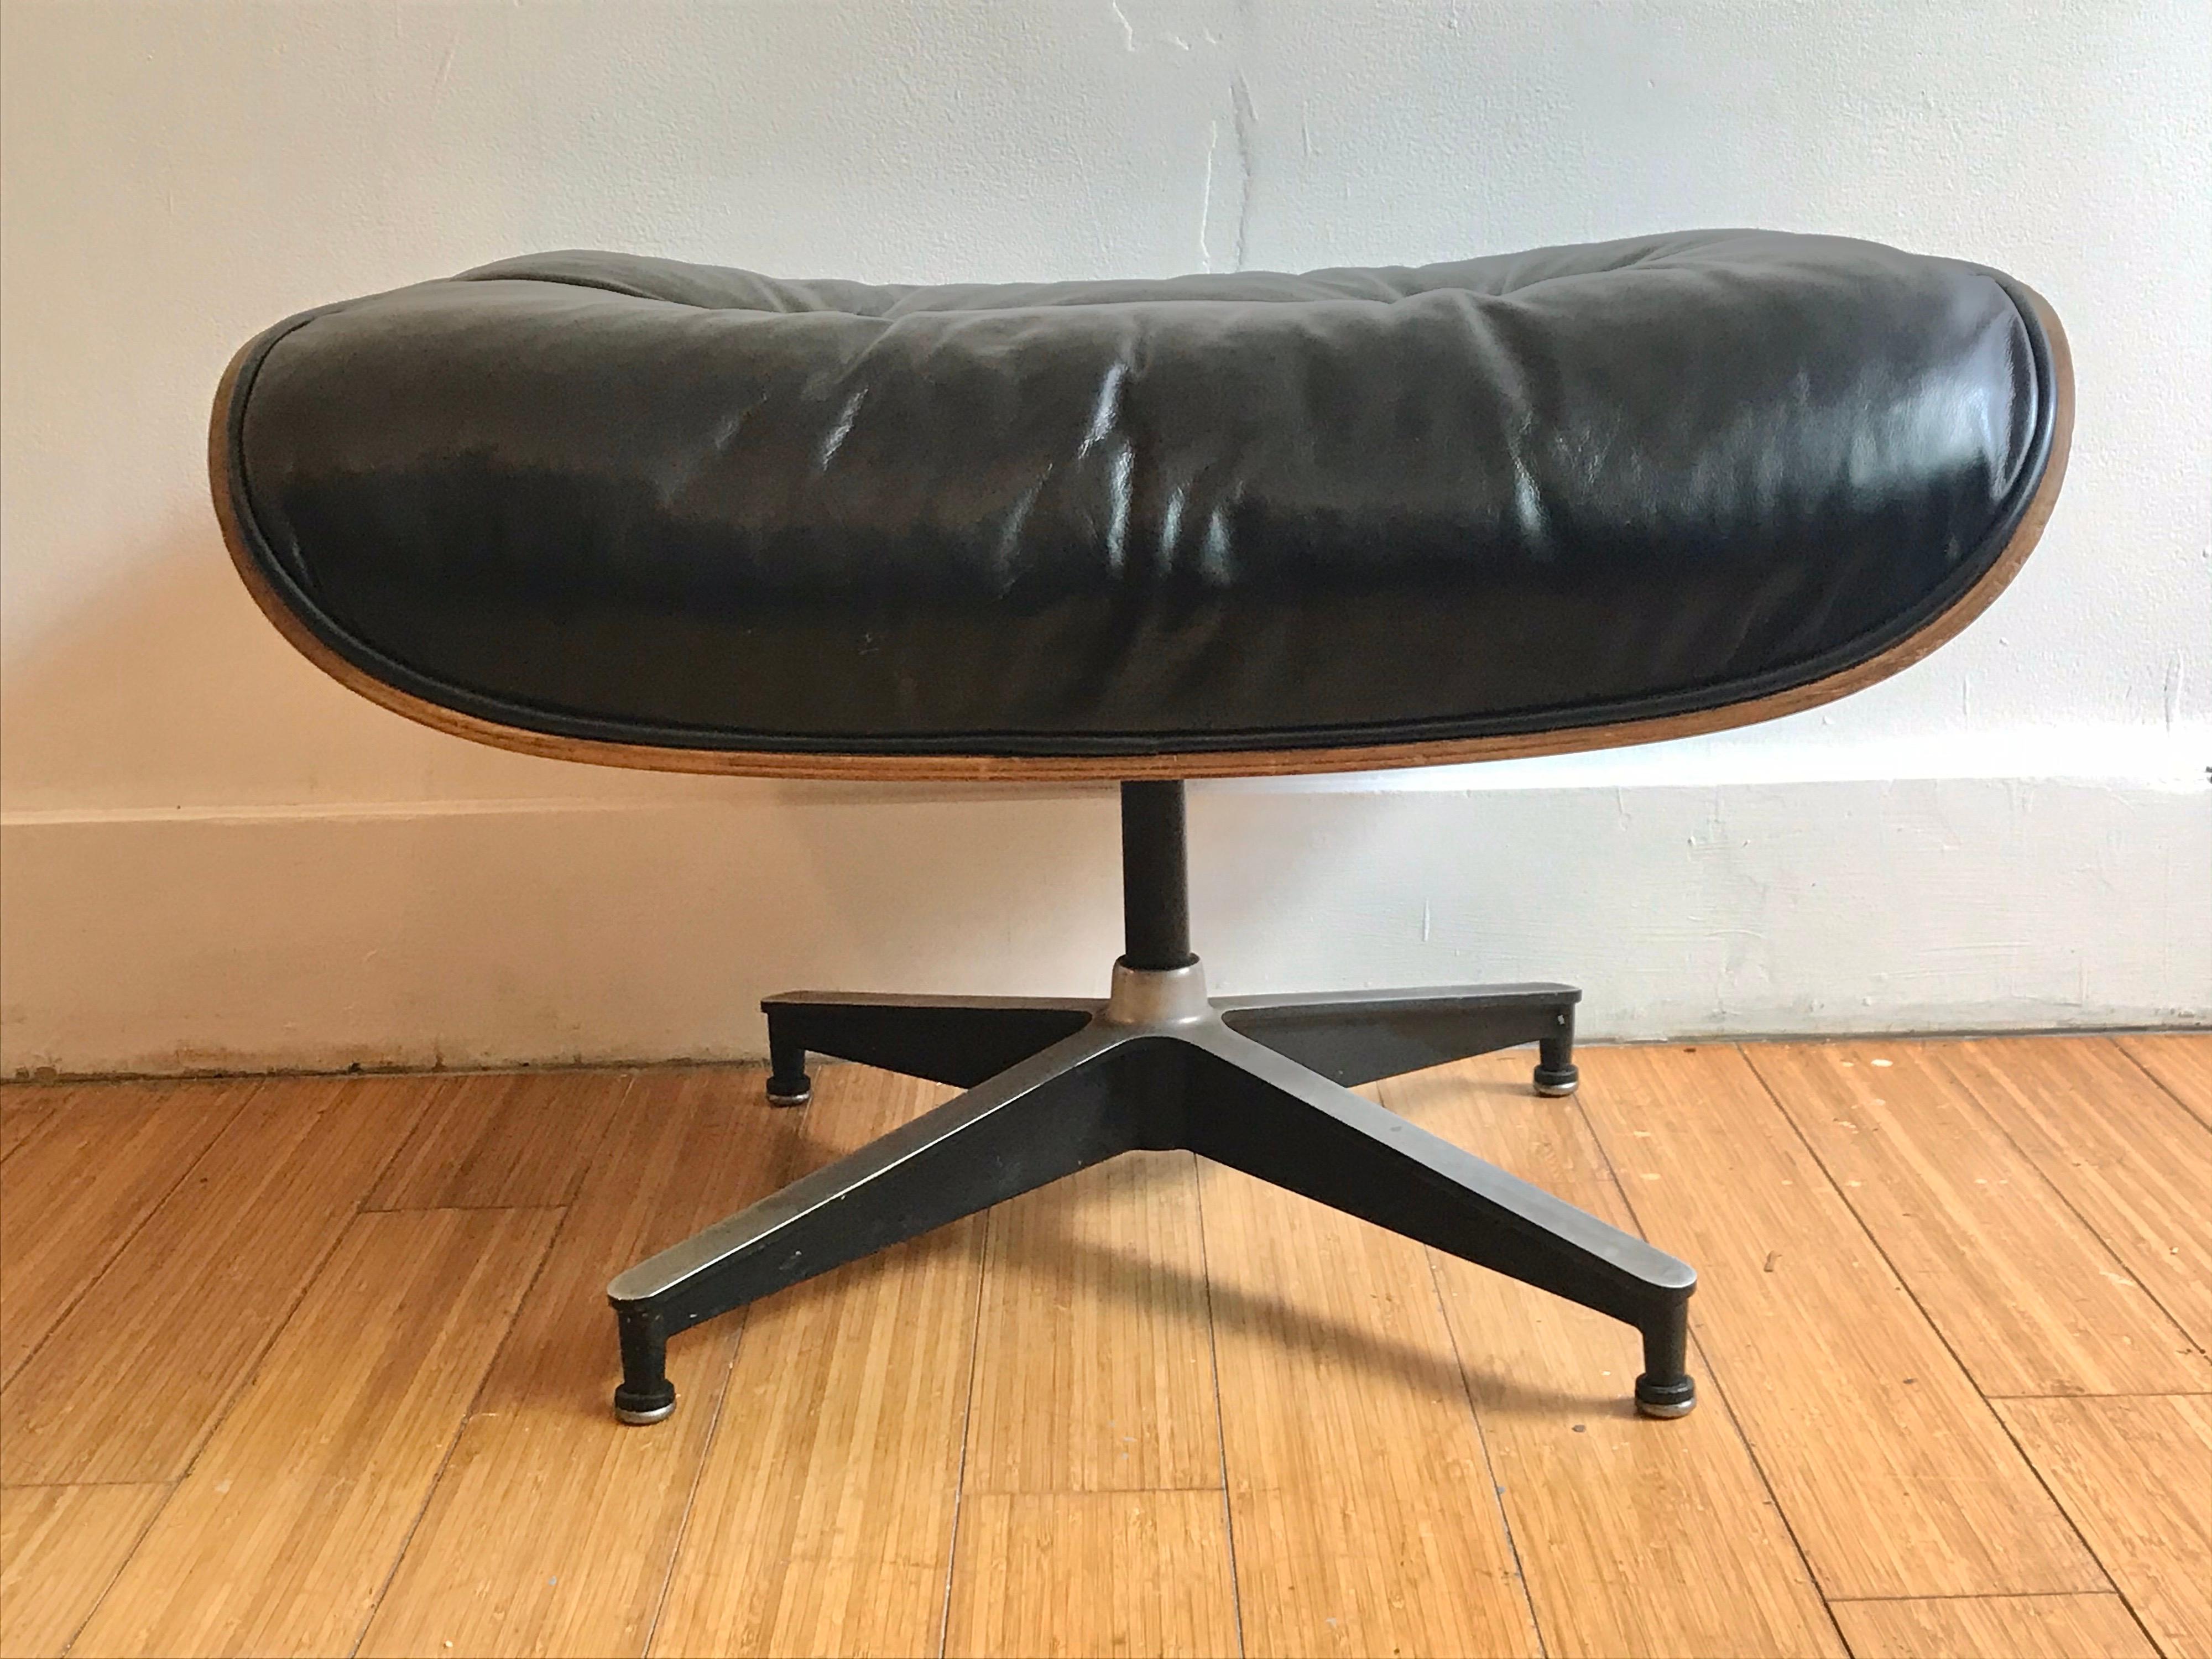 A Classic Mid-Century Modern 671 ottoman.
Manufactured by Herman Miller. 
Great to use for occasional seating, as an accent or pair with Classic 670 leather lounge chair.
Original vintage condition, minor wear, no major damage, sturdy and